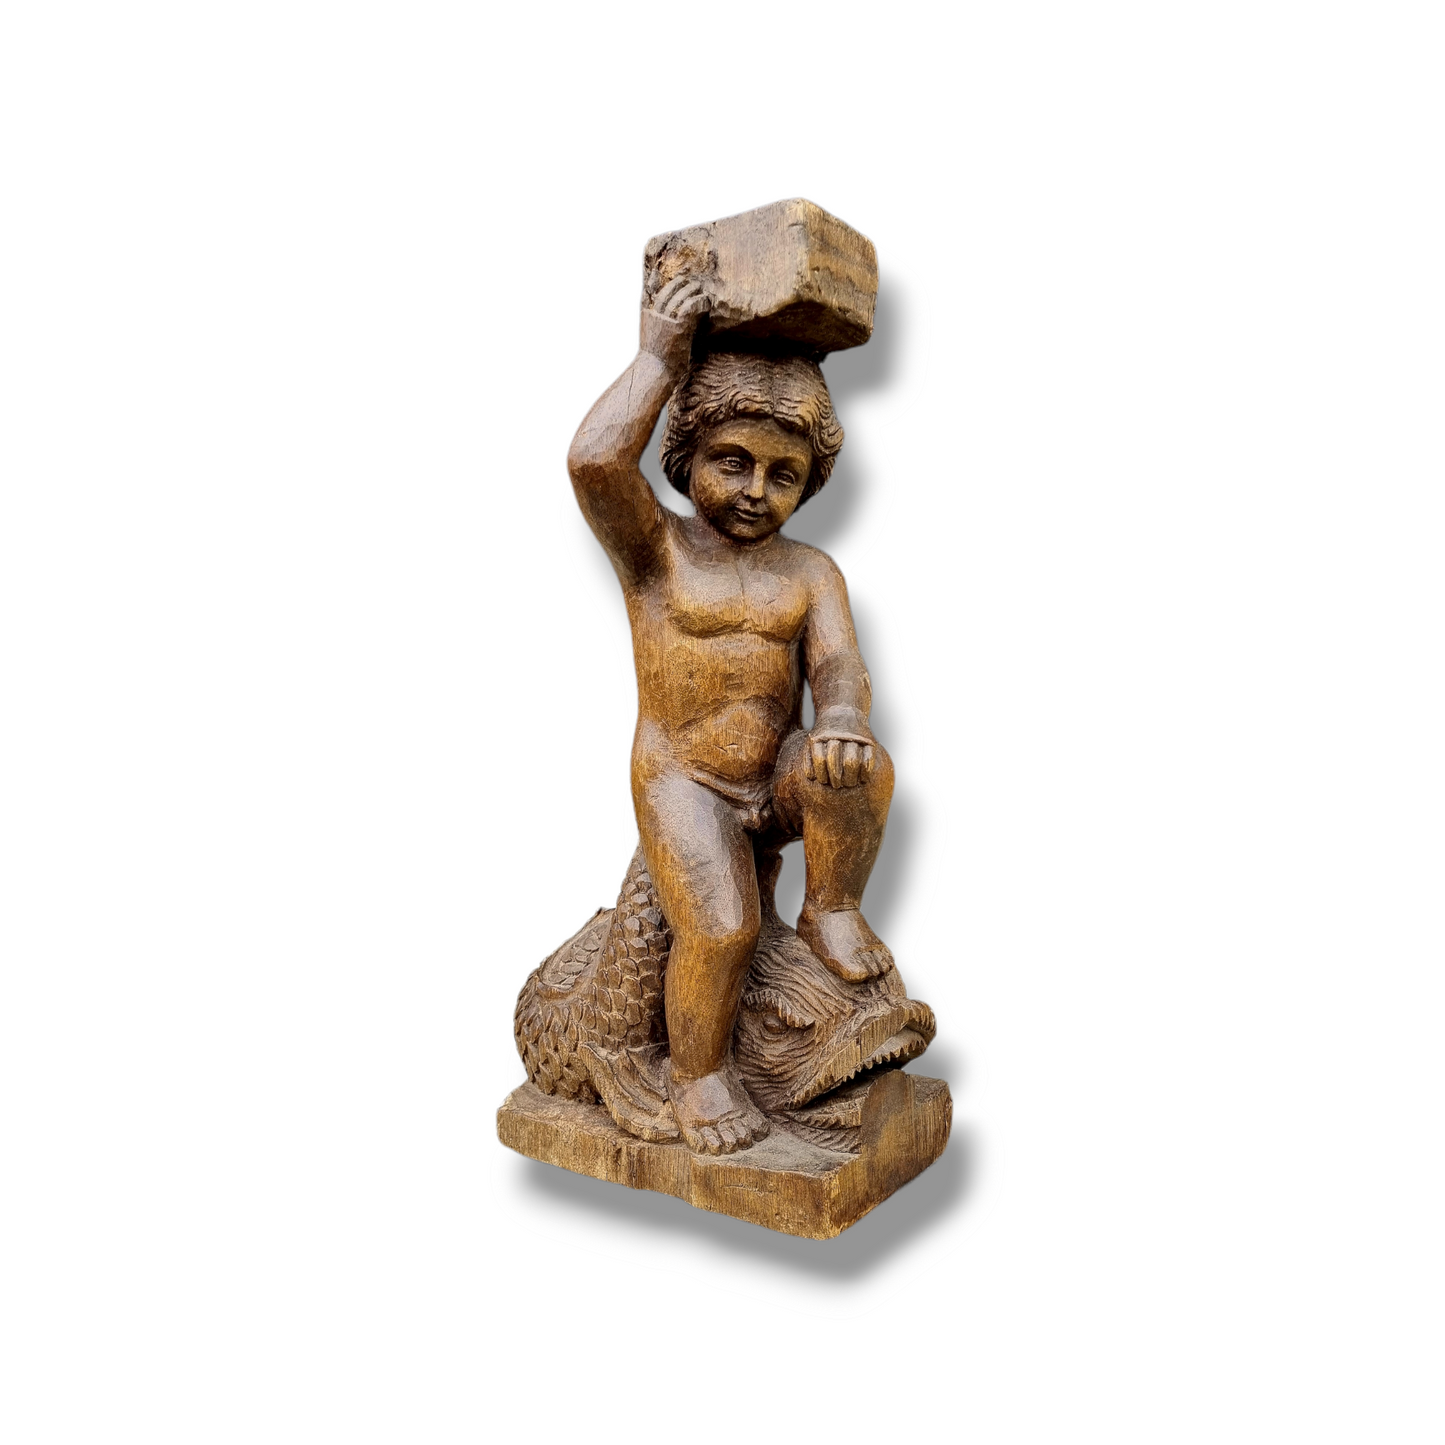 19thC Antique Carved Wood Sculpture of Palaemon, The Greco-Roman Sea God, Riding Upon A Dolphin